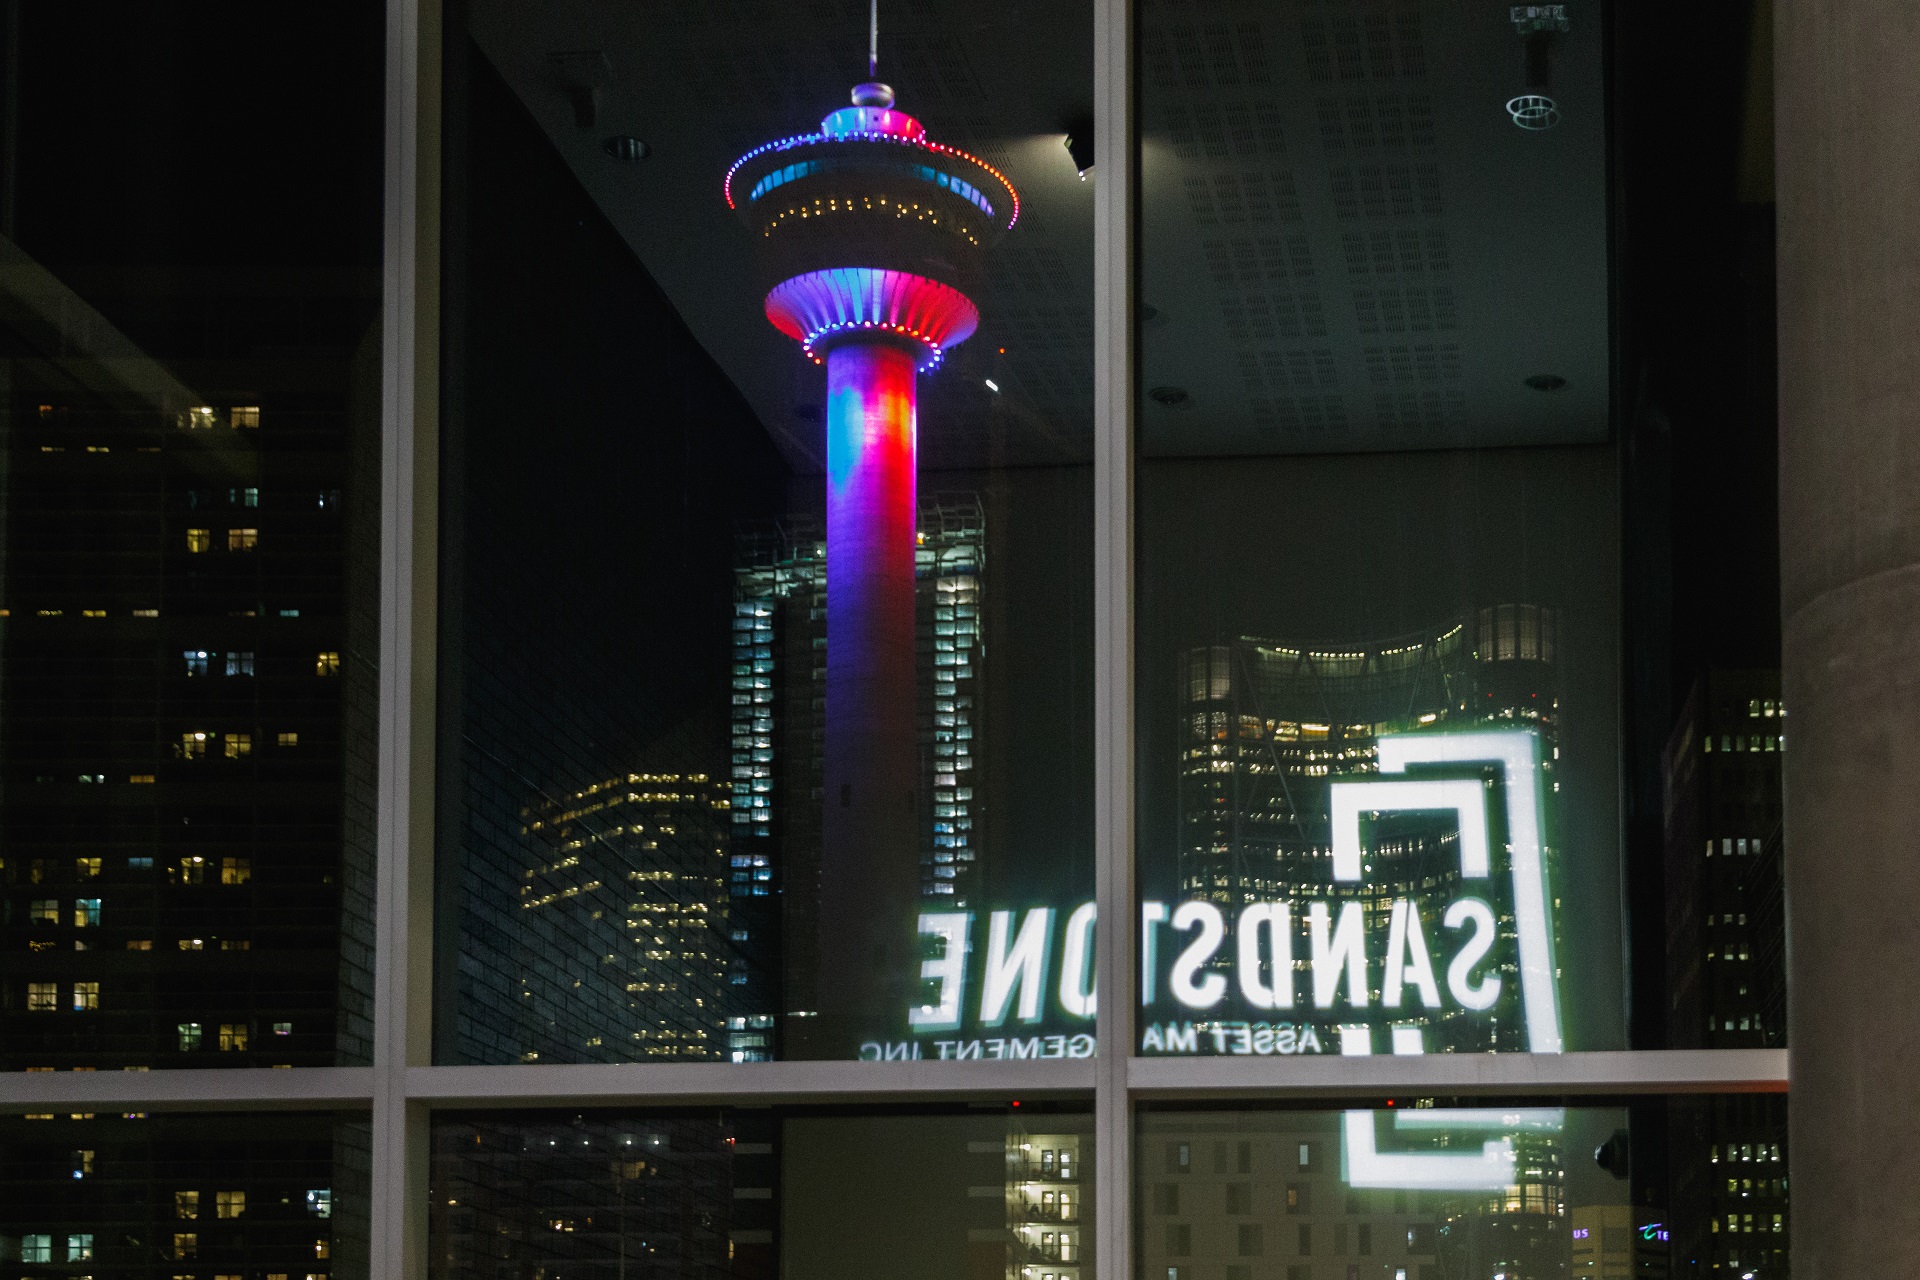 Calgary Tower at night - as seen from OUTLOOK 2019